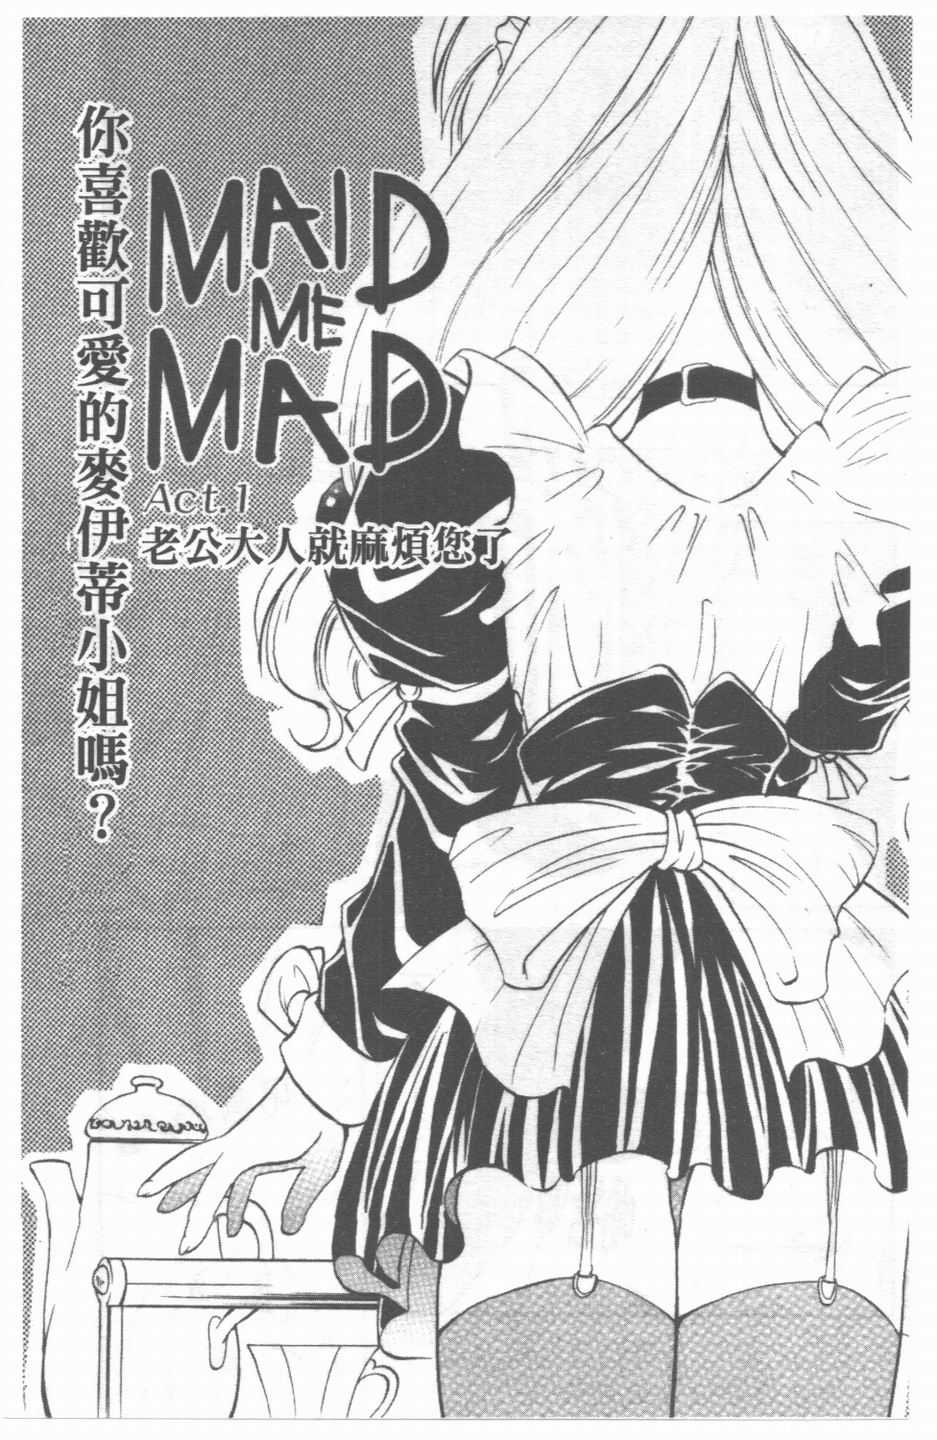 Maid Me Mad [Chinese Trans] 